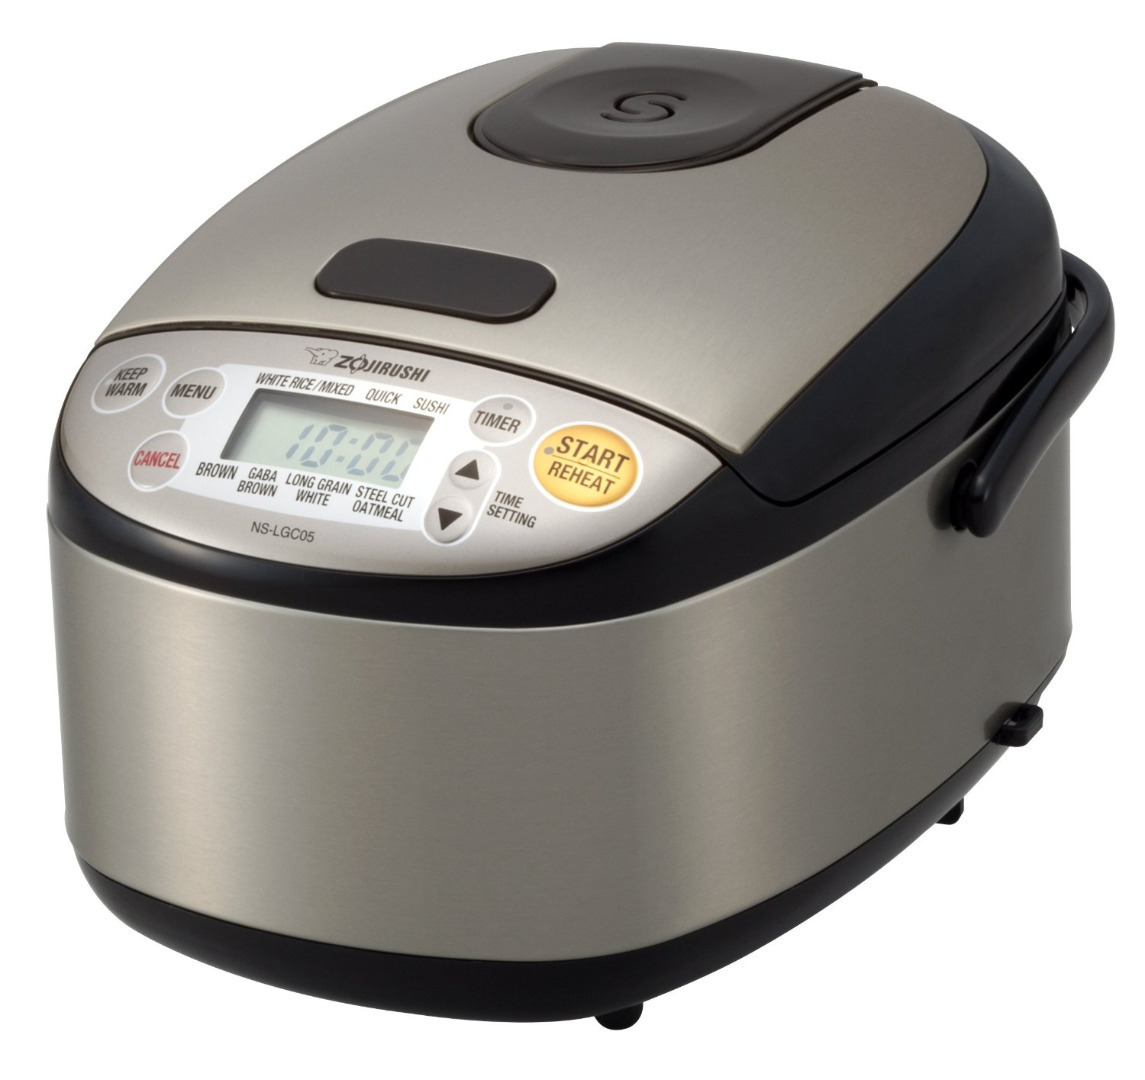 Zojirushi NS-LGC05XB Micom Rice Cooker & Warmer, 3 Cup (Uncooked), Stainless Black - image 1 of 11